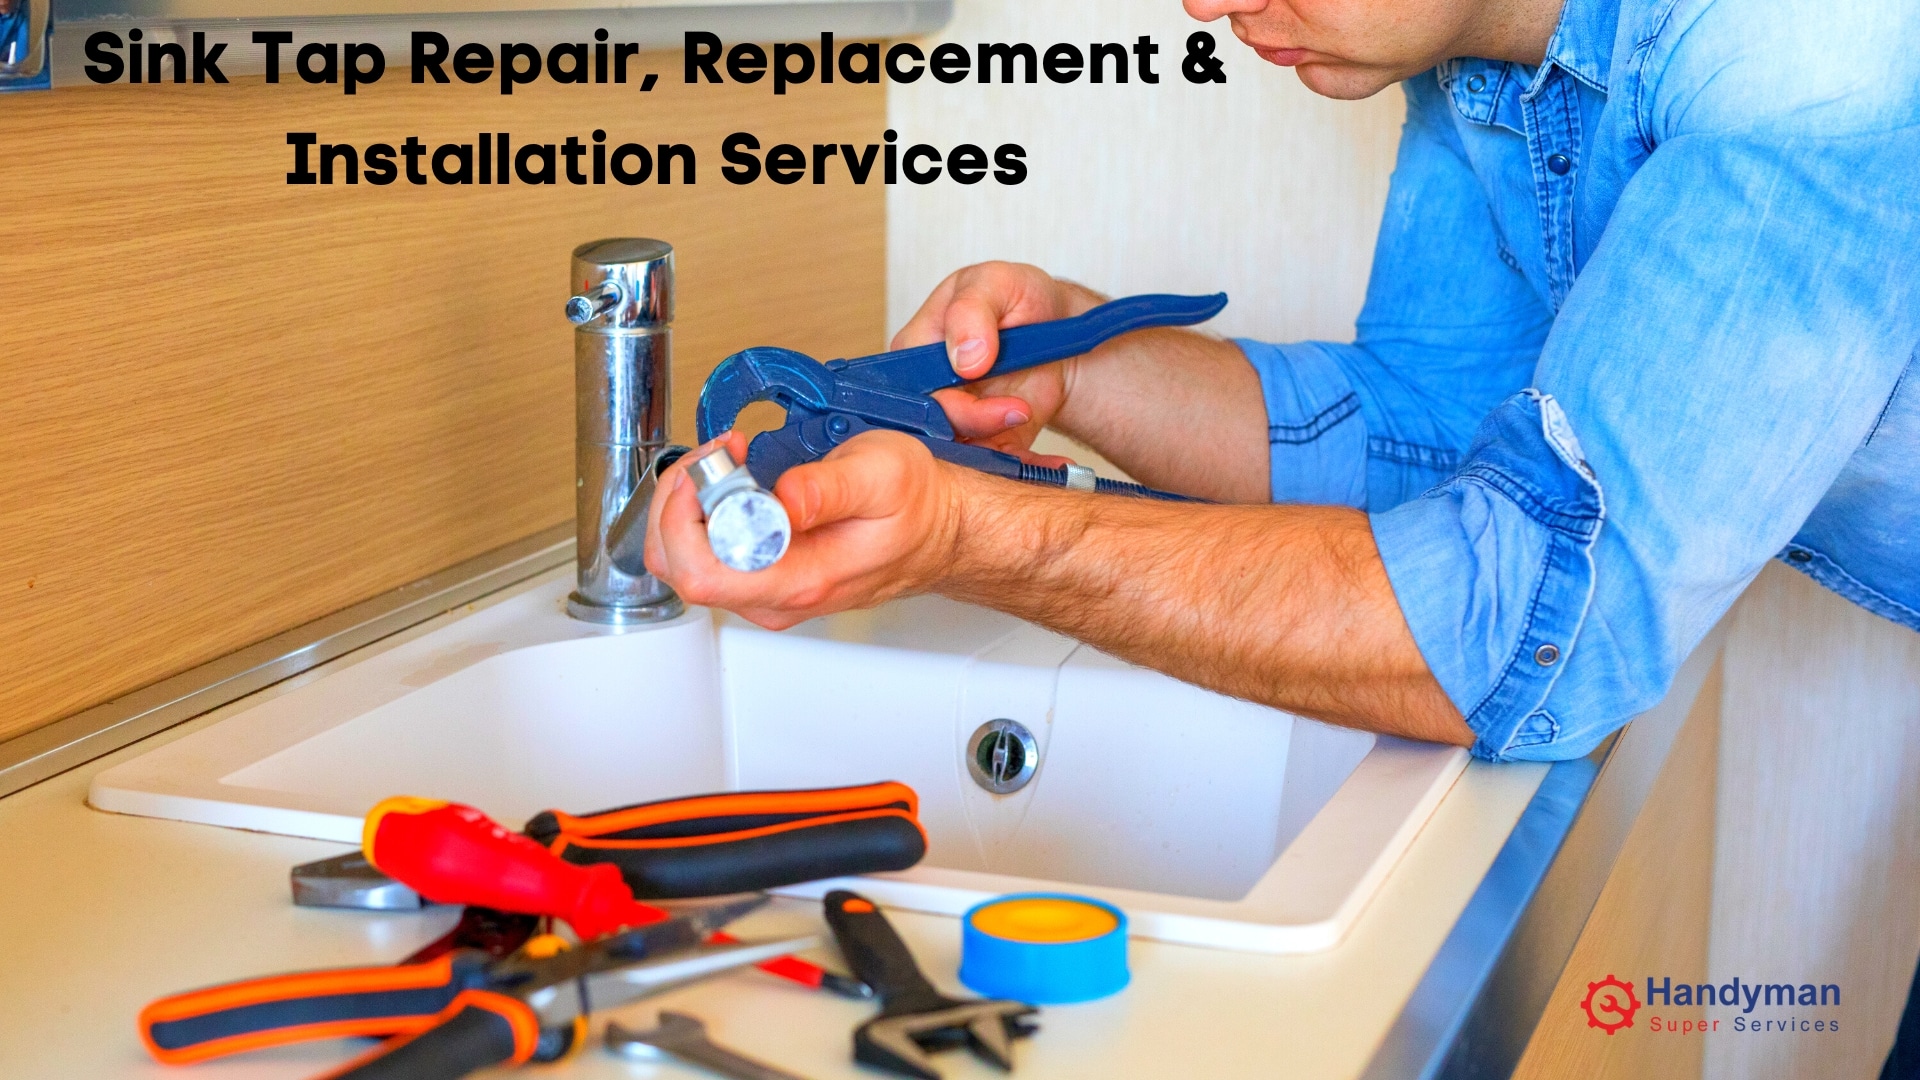 Sink Tap Repair, Replacement Services | Whatsap+65 8234 4474